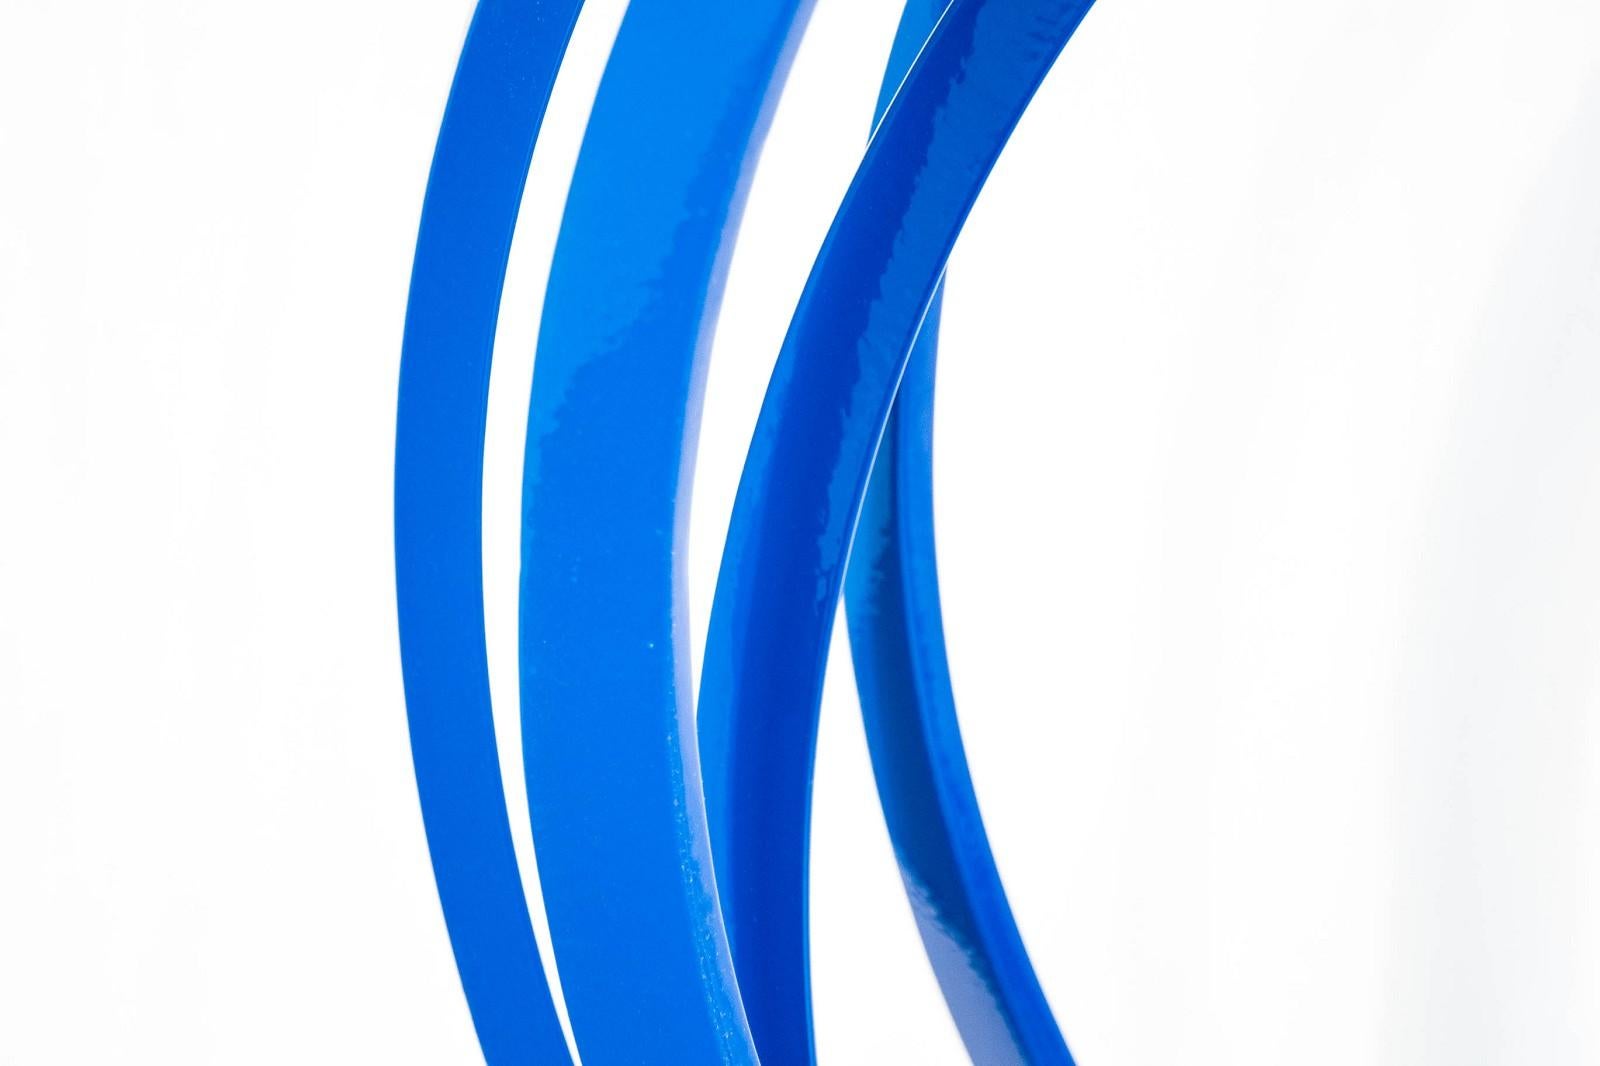 Round & Round Blue - glossy, circles, steel, geometric abstract wall sculpture - Contemporary Sculpture by Shayne Dark